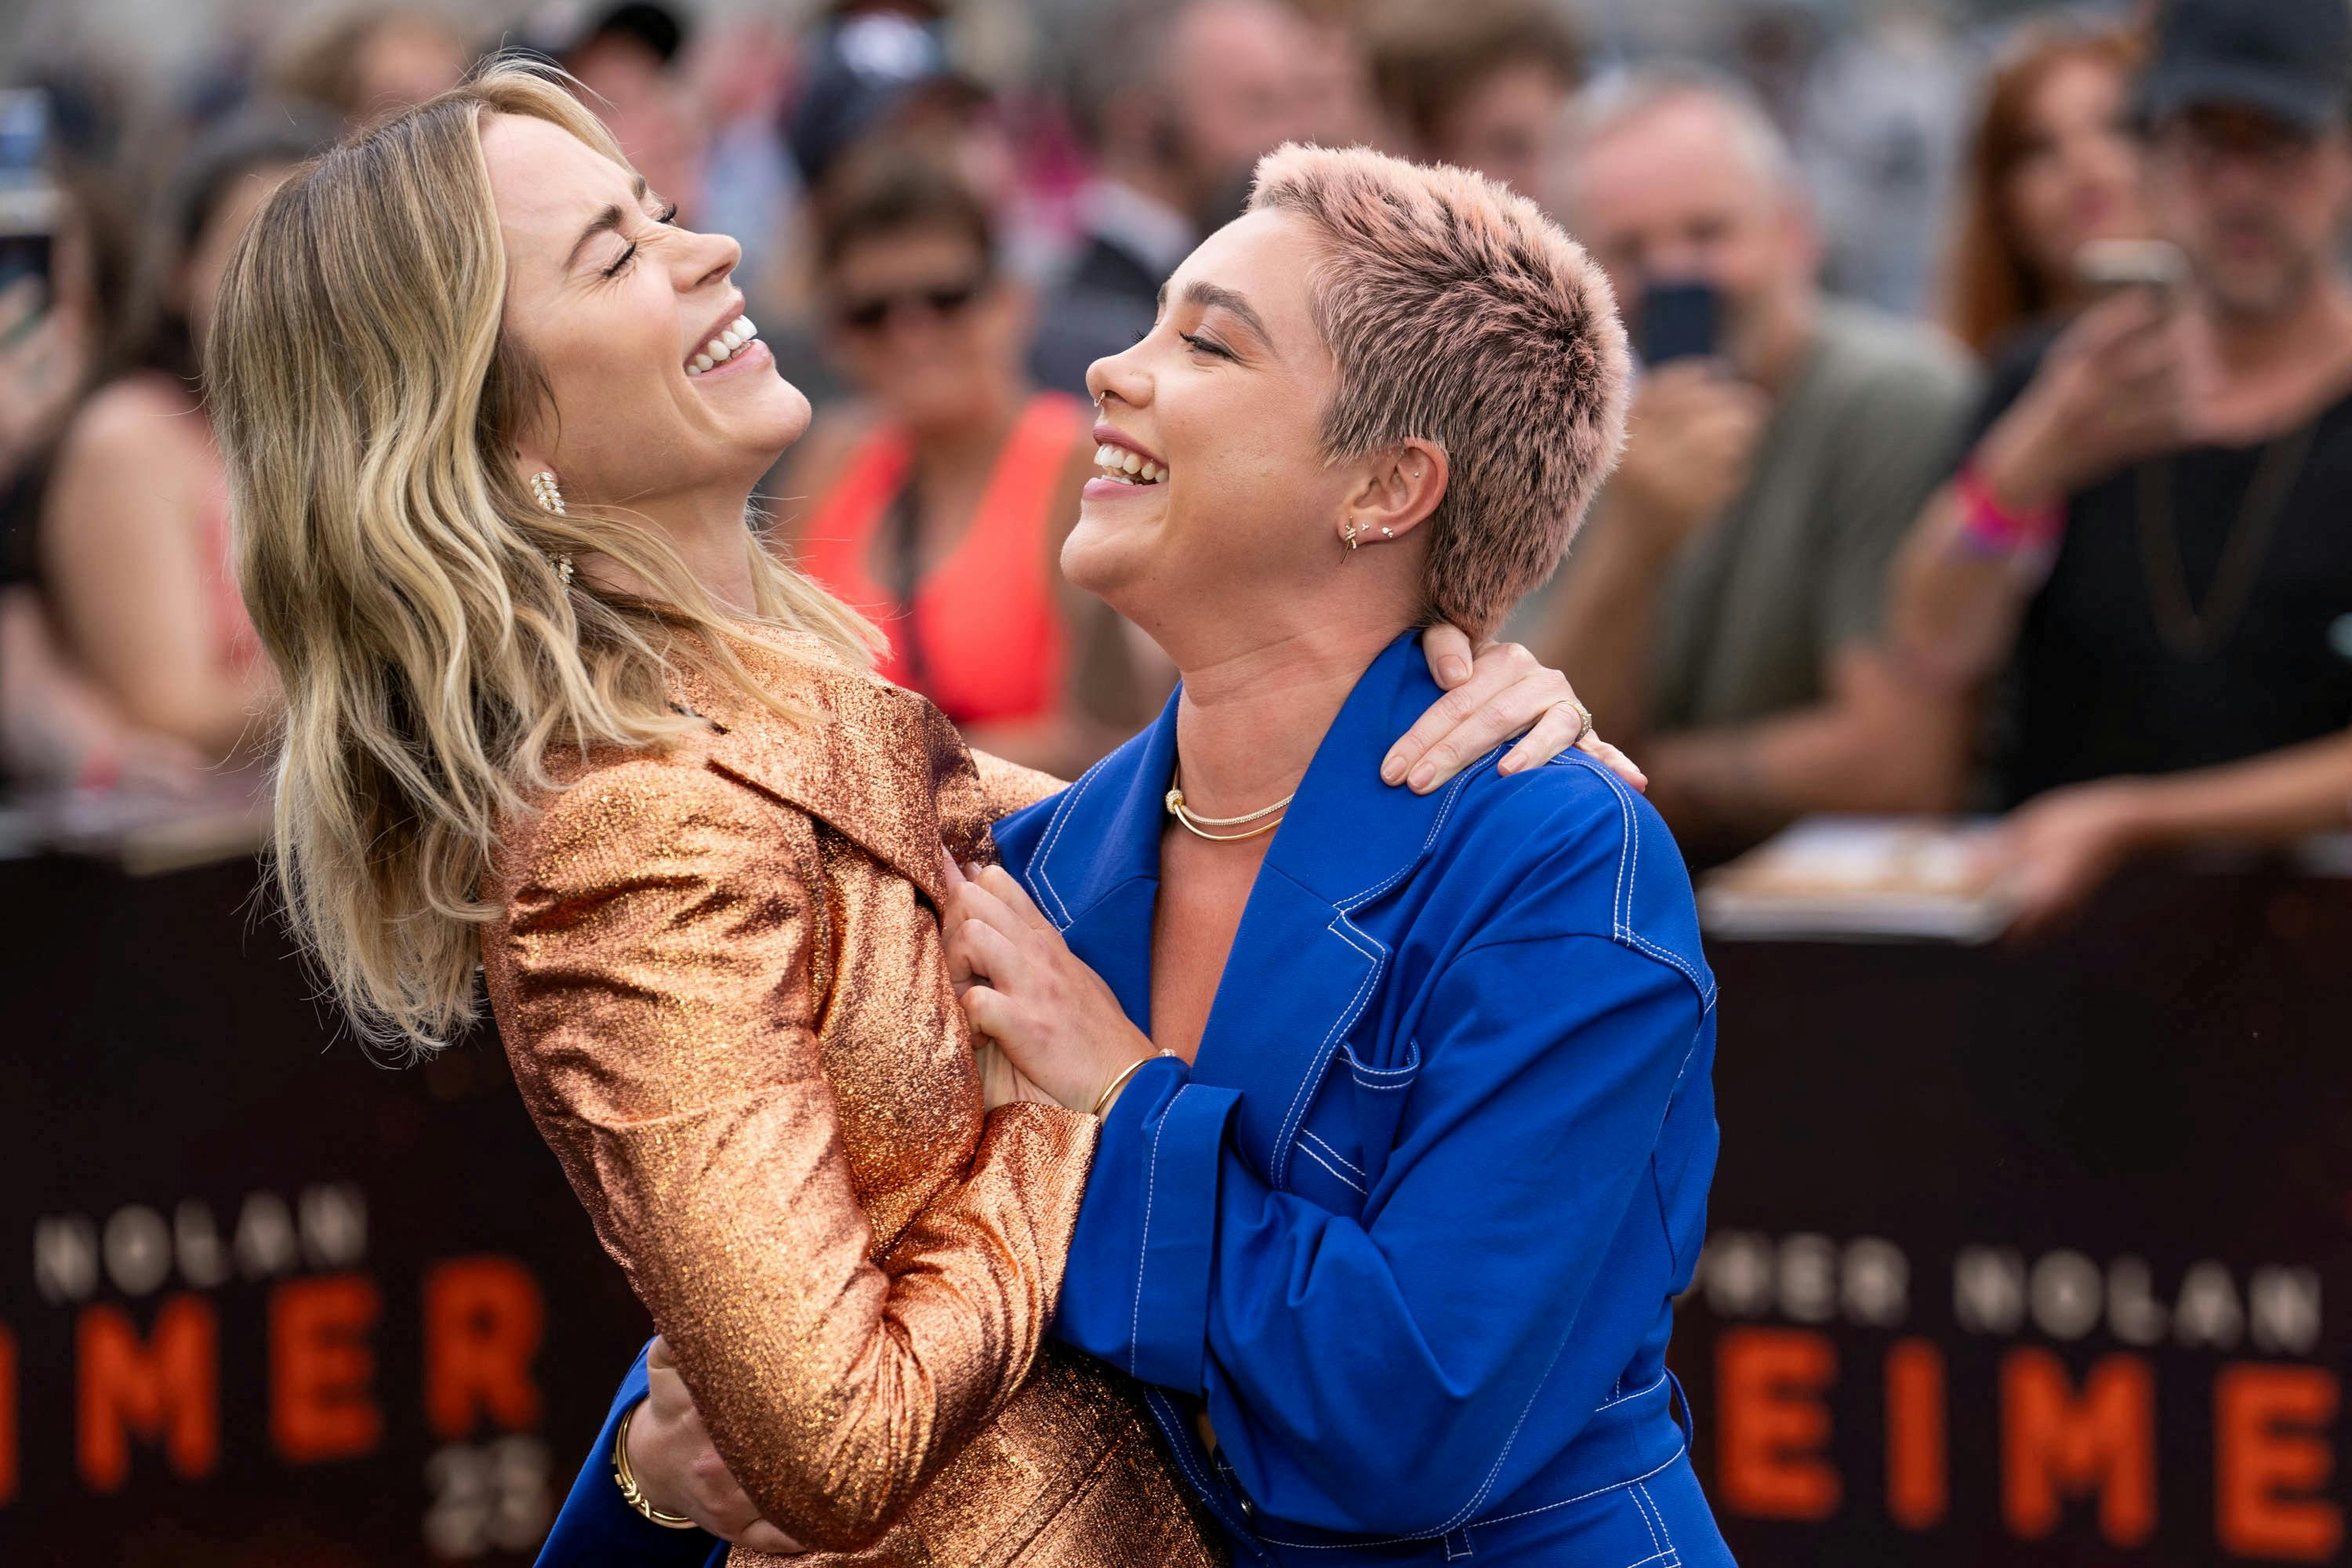 Cast members Emily Blunt and Florence Pugh attend a photo call for "Oppenheimer" in London, Britain, July 12, 2023. REUTERS/Maja Smiejkowska